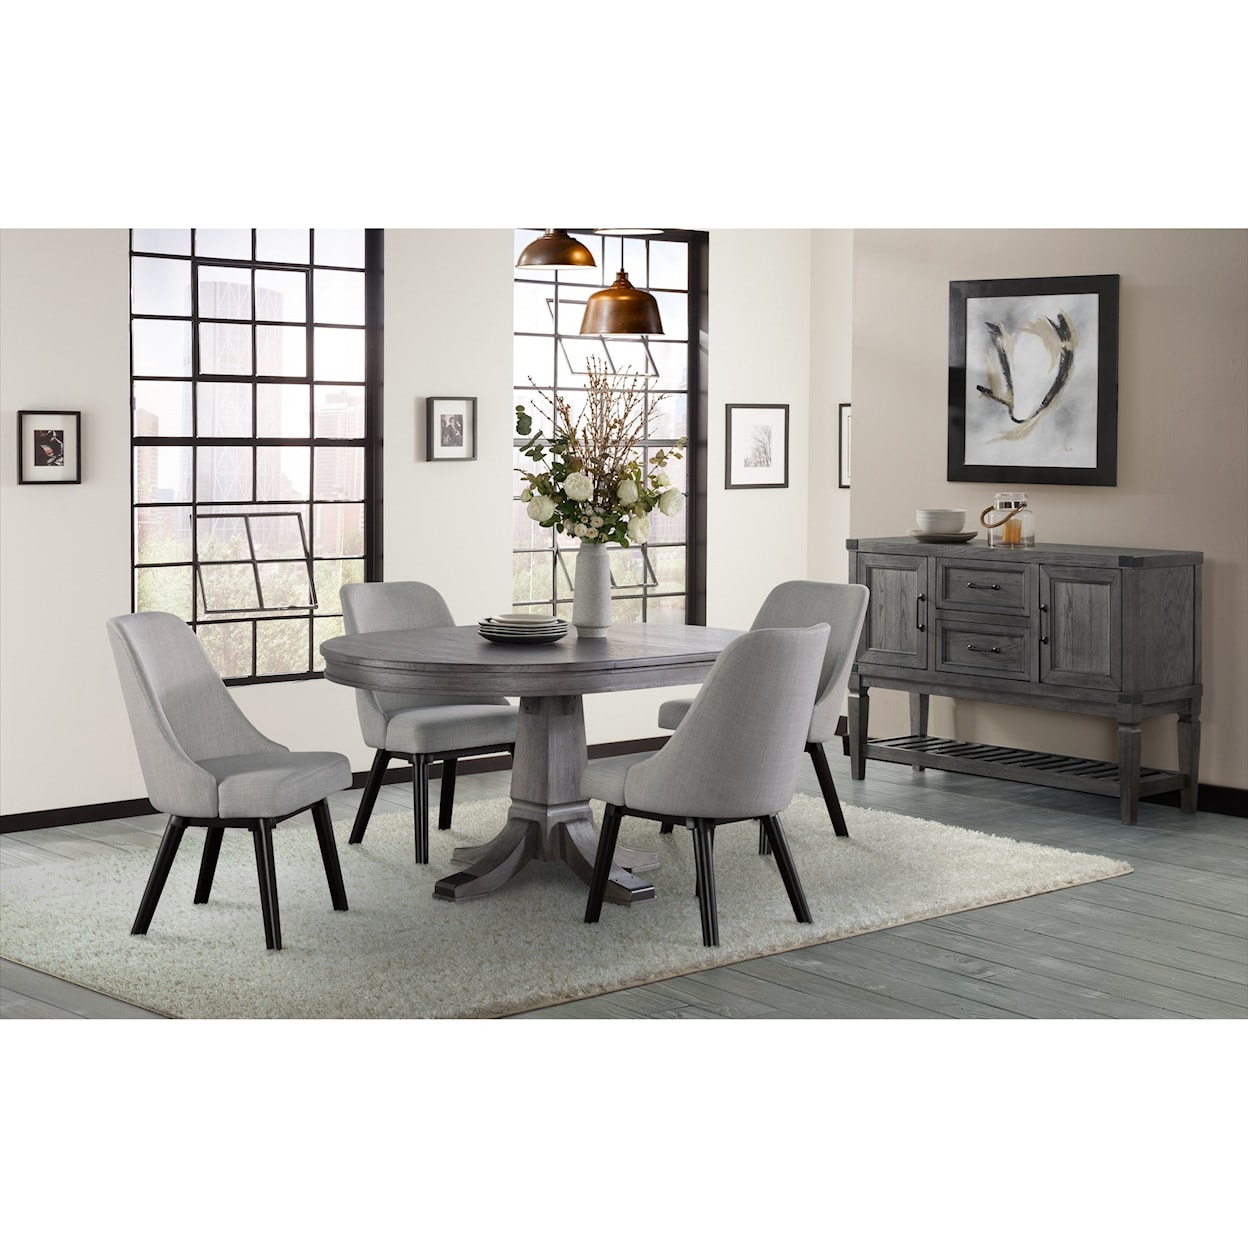 Intercon Foundry Upholstered Dining Chair